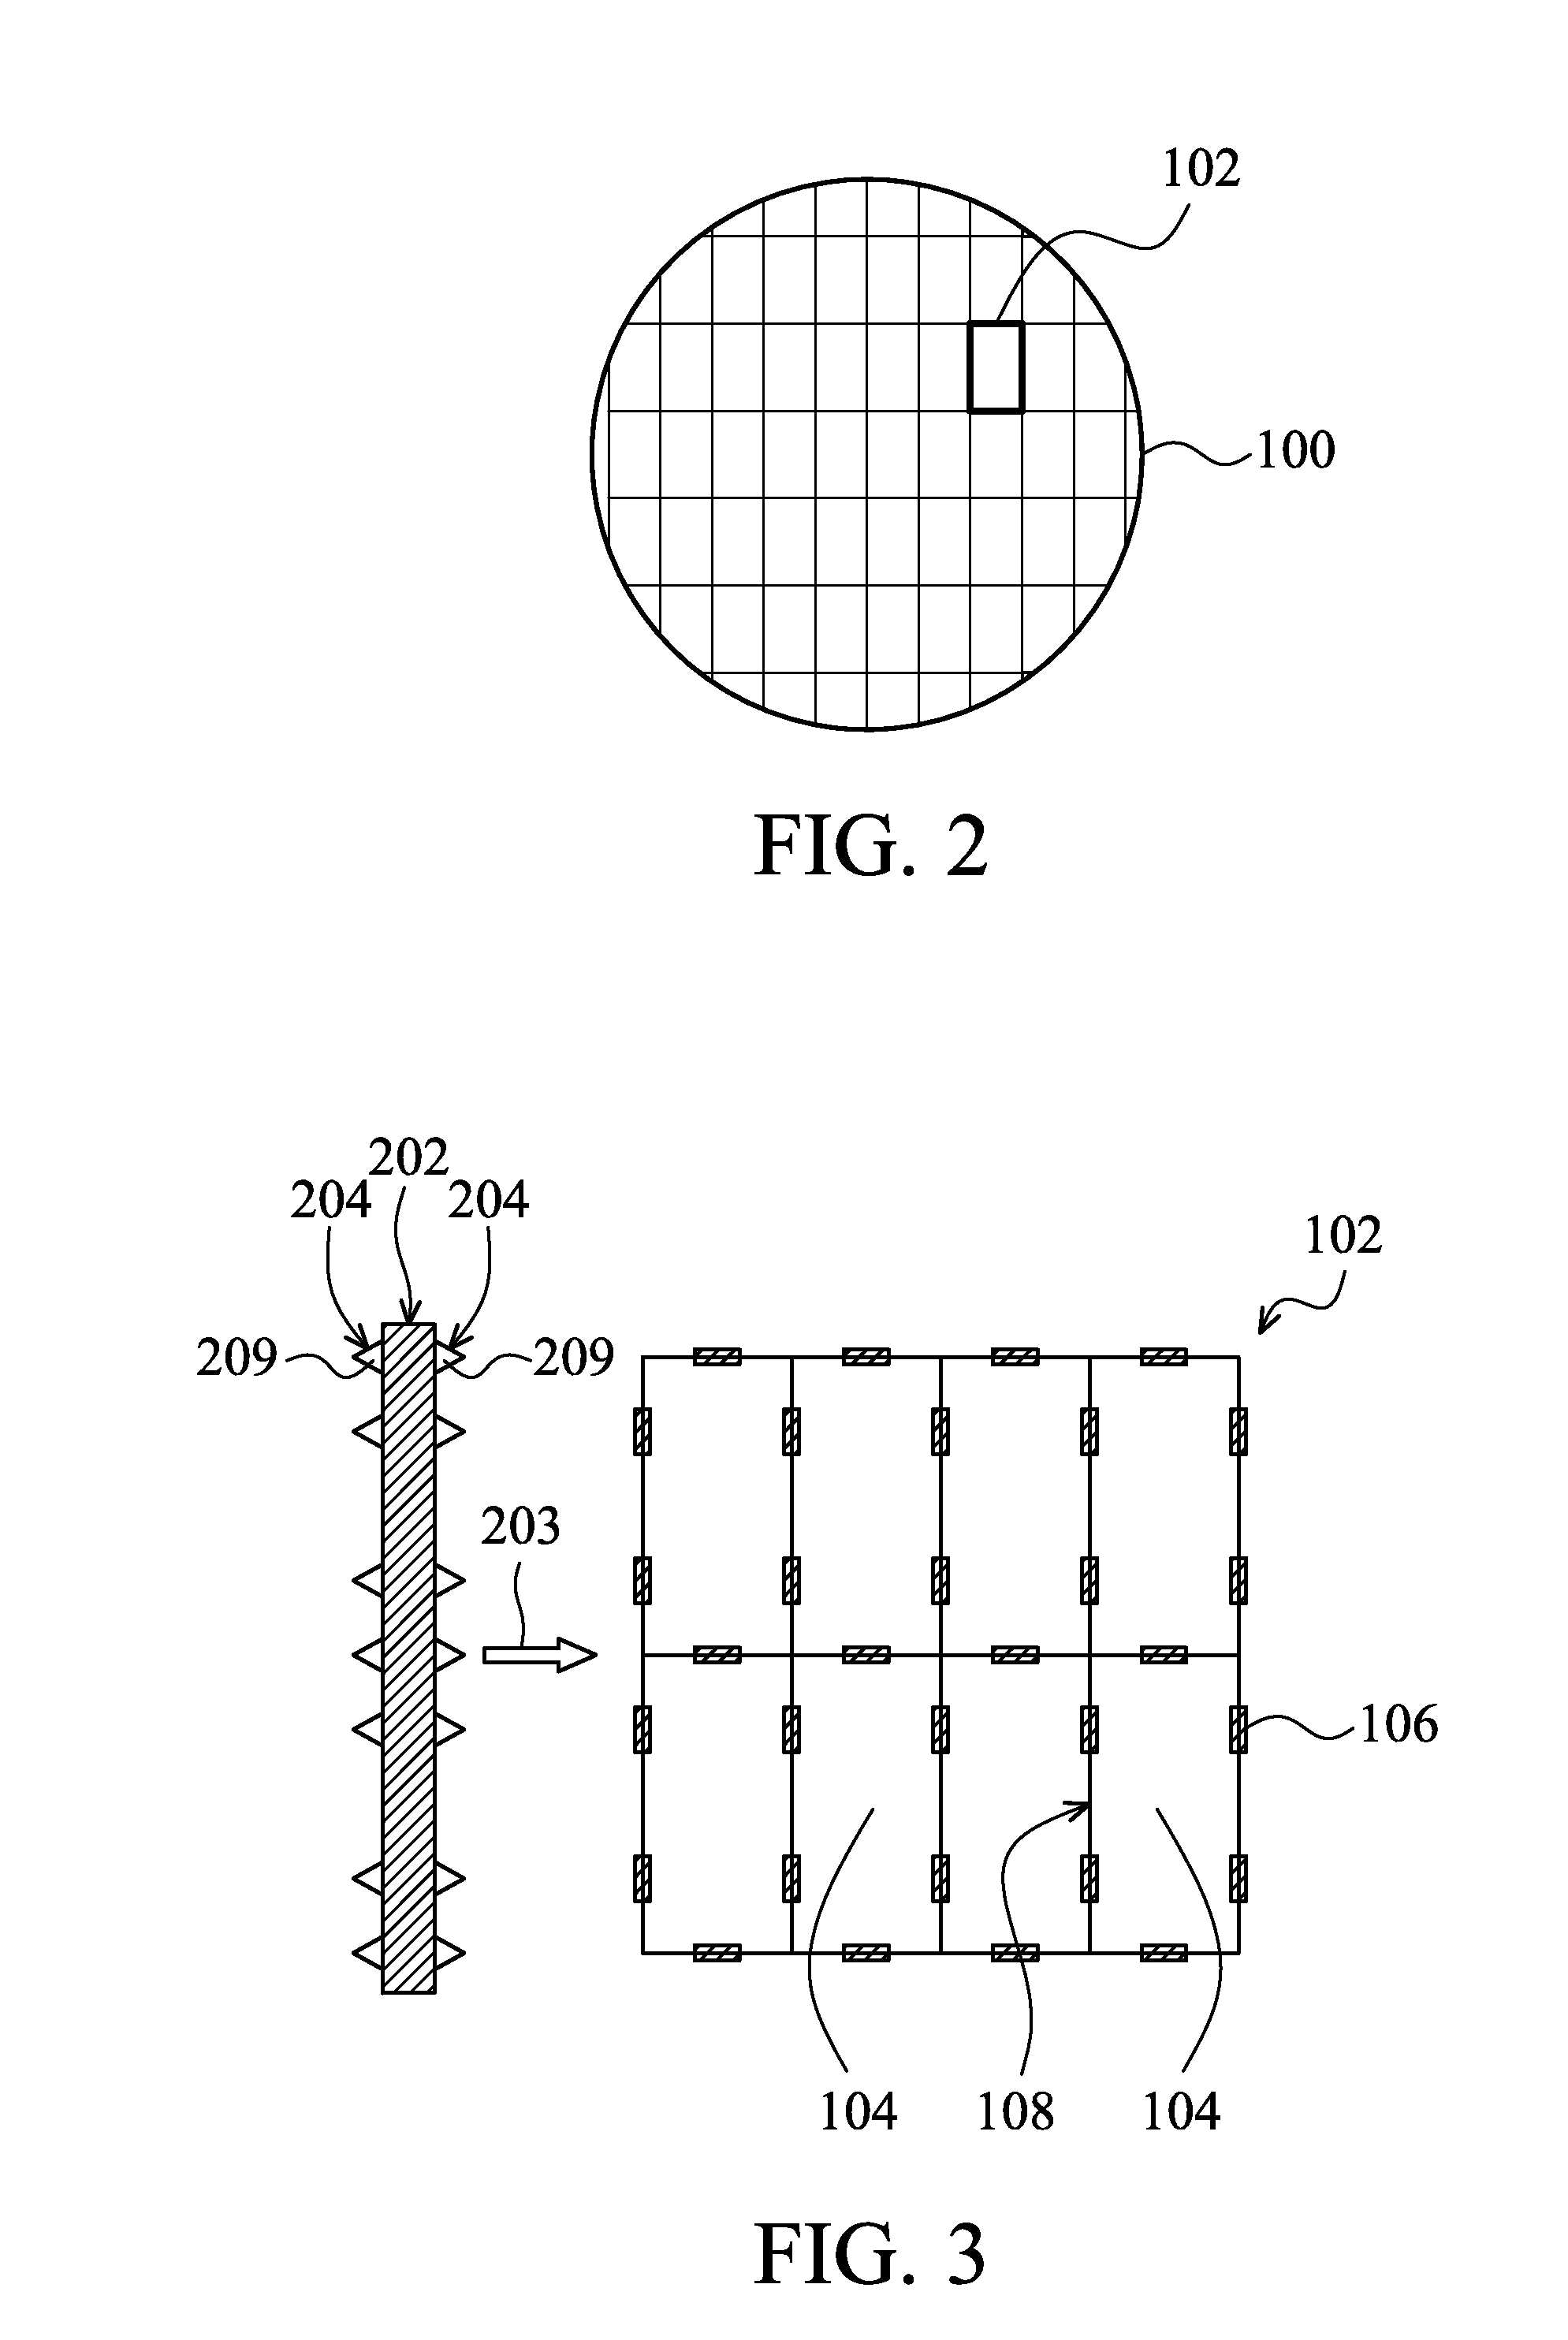 Dynamic wafer alignment method in exposure scanner system